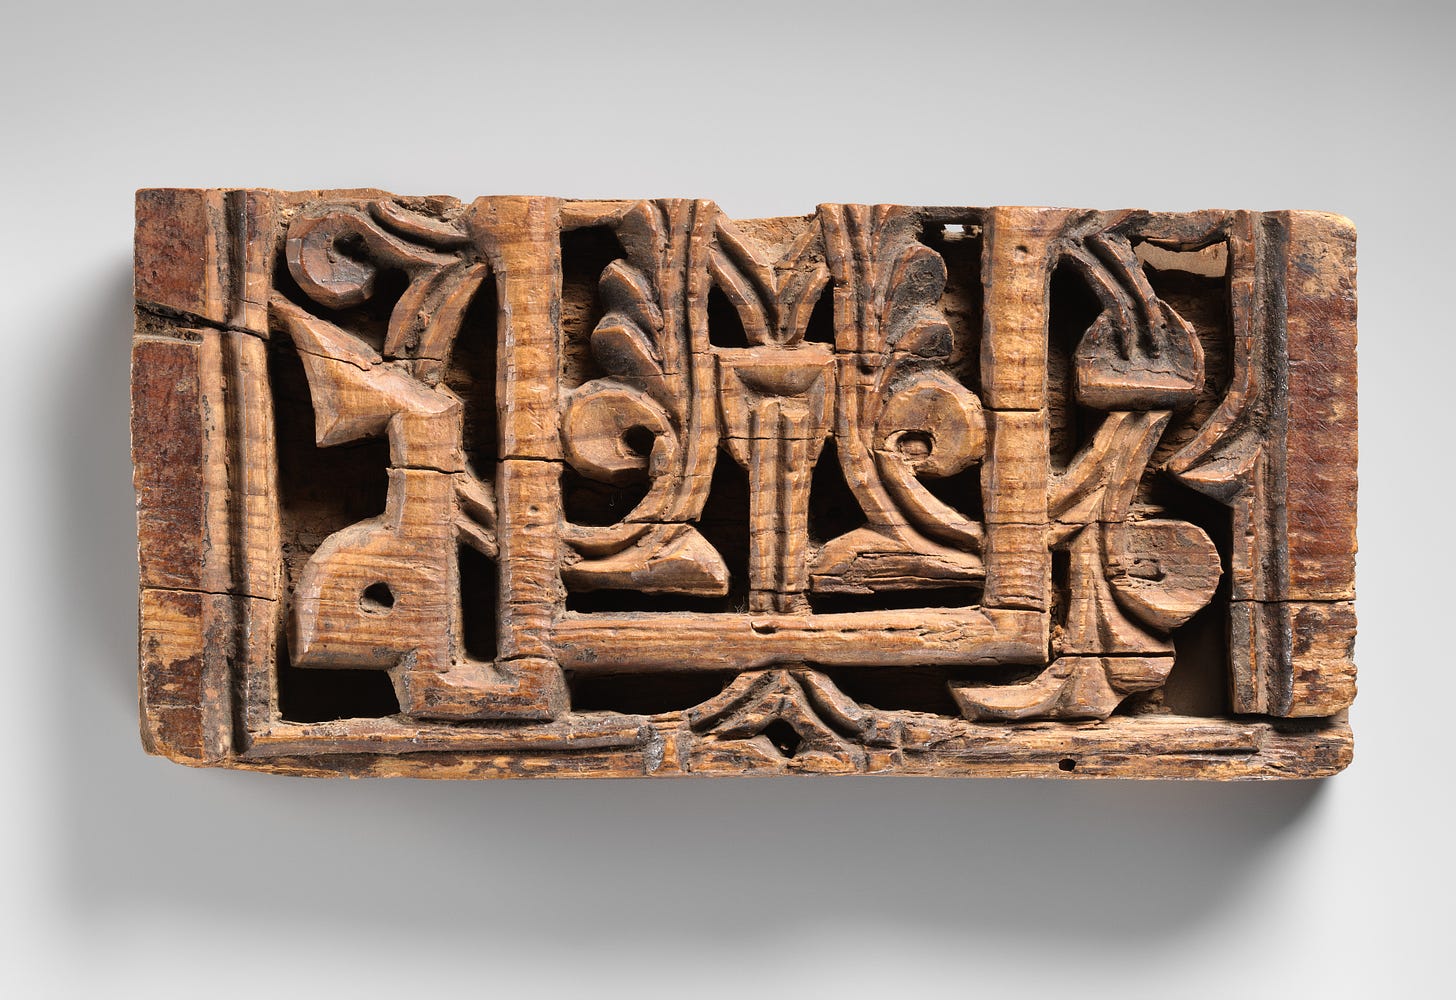 The program of interior decoration for Andalusian palatial residences included a tile dado surmounted by carved stucco or stone, crowned by wooden friezes and cornice elements. This panel is probably a fragment of such a frieze. Carved in deep relief, it bears part of an inscription in kufic script against a vegetal background.